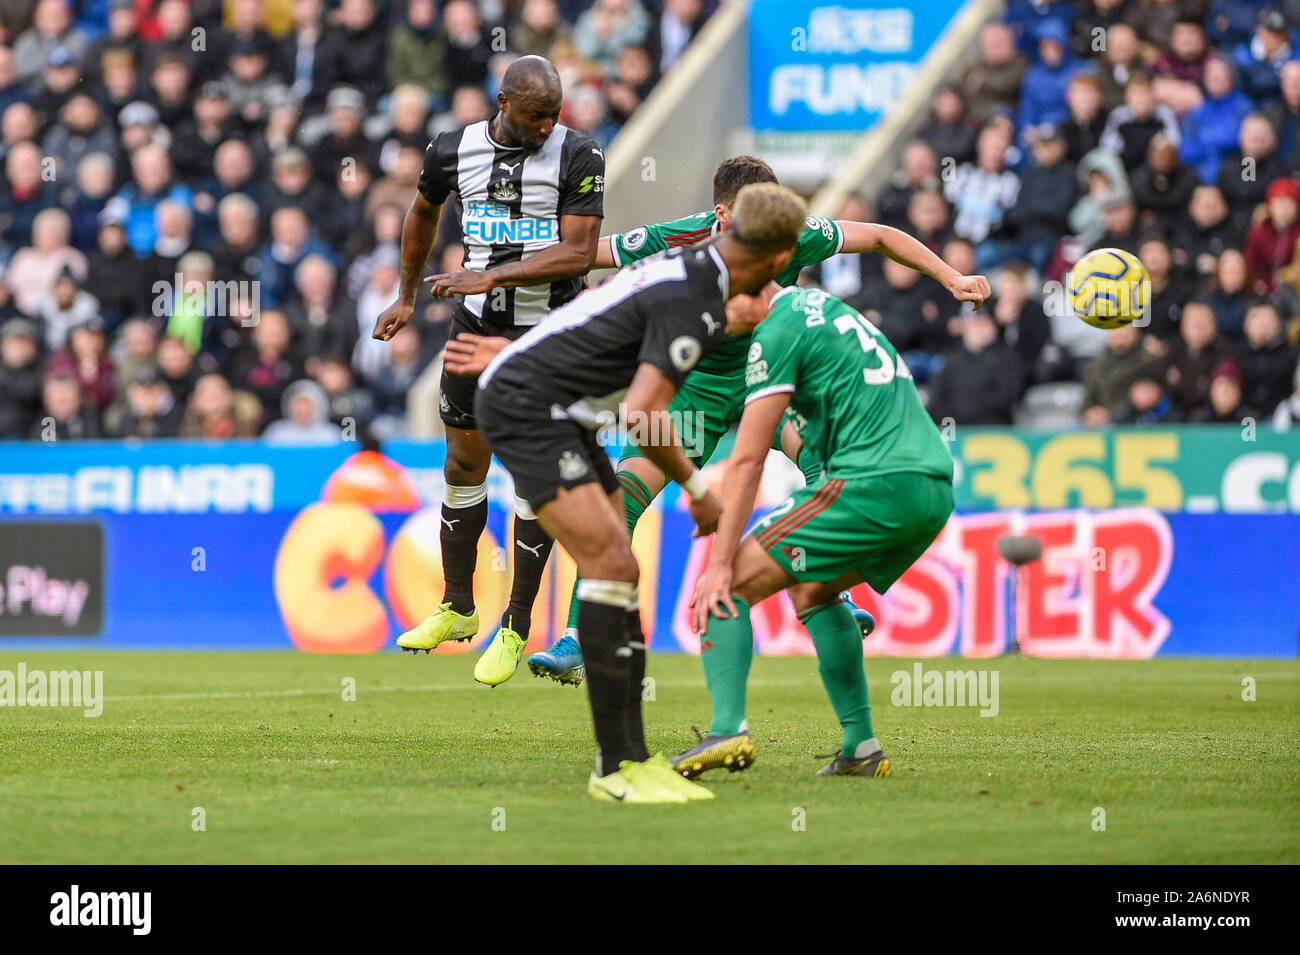 27th October 2019, St. James's Park, Newcastle, England; Premier League, Newcastle United v Wolverhampton Wanderers : Jetro Willems of Newcastle United heads at goal Credit: Iam Burn/News Images Stock Photo